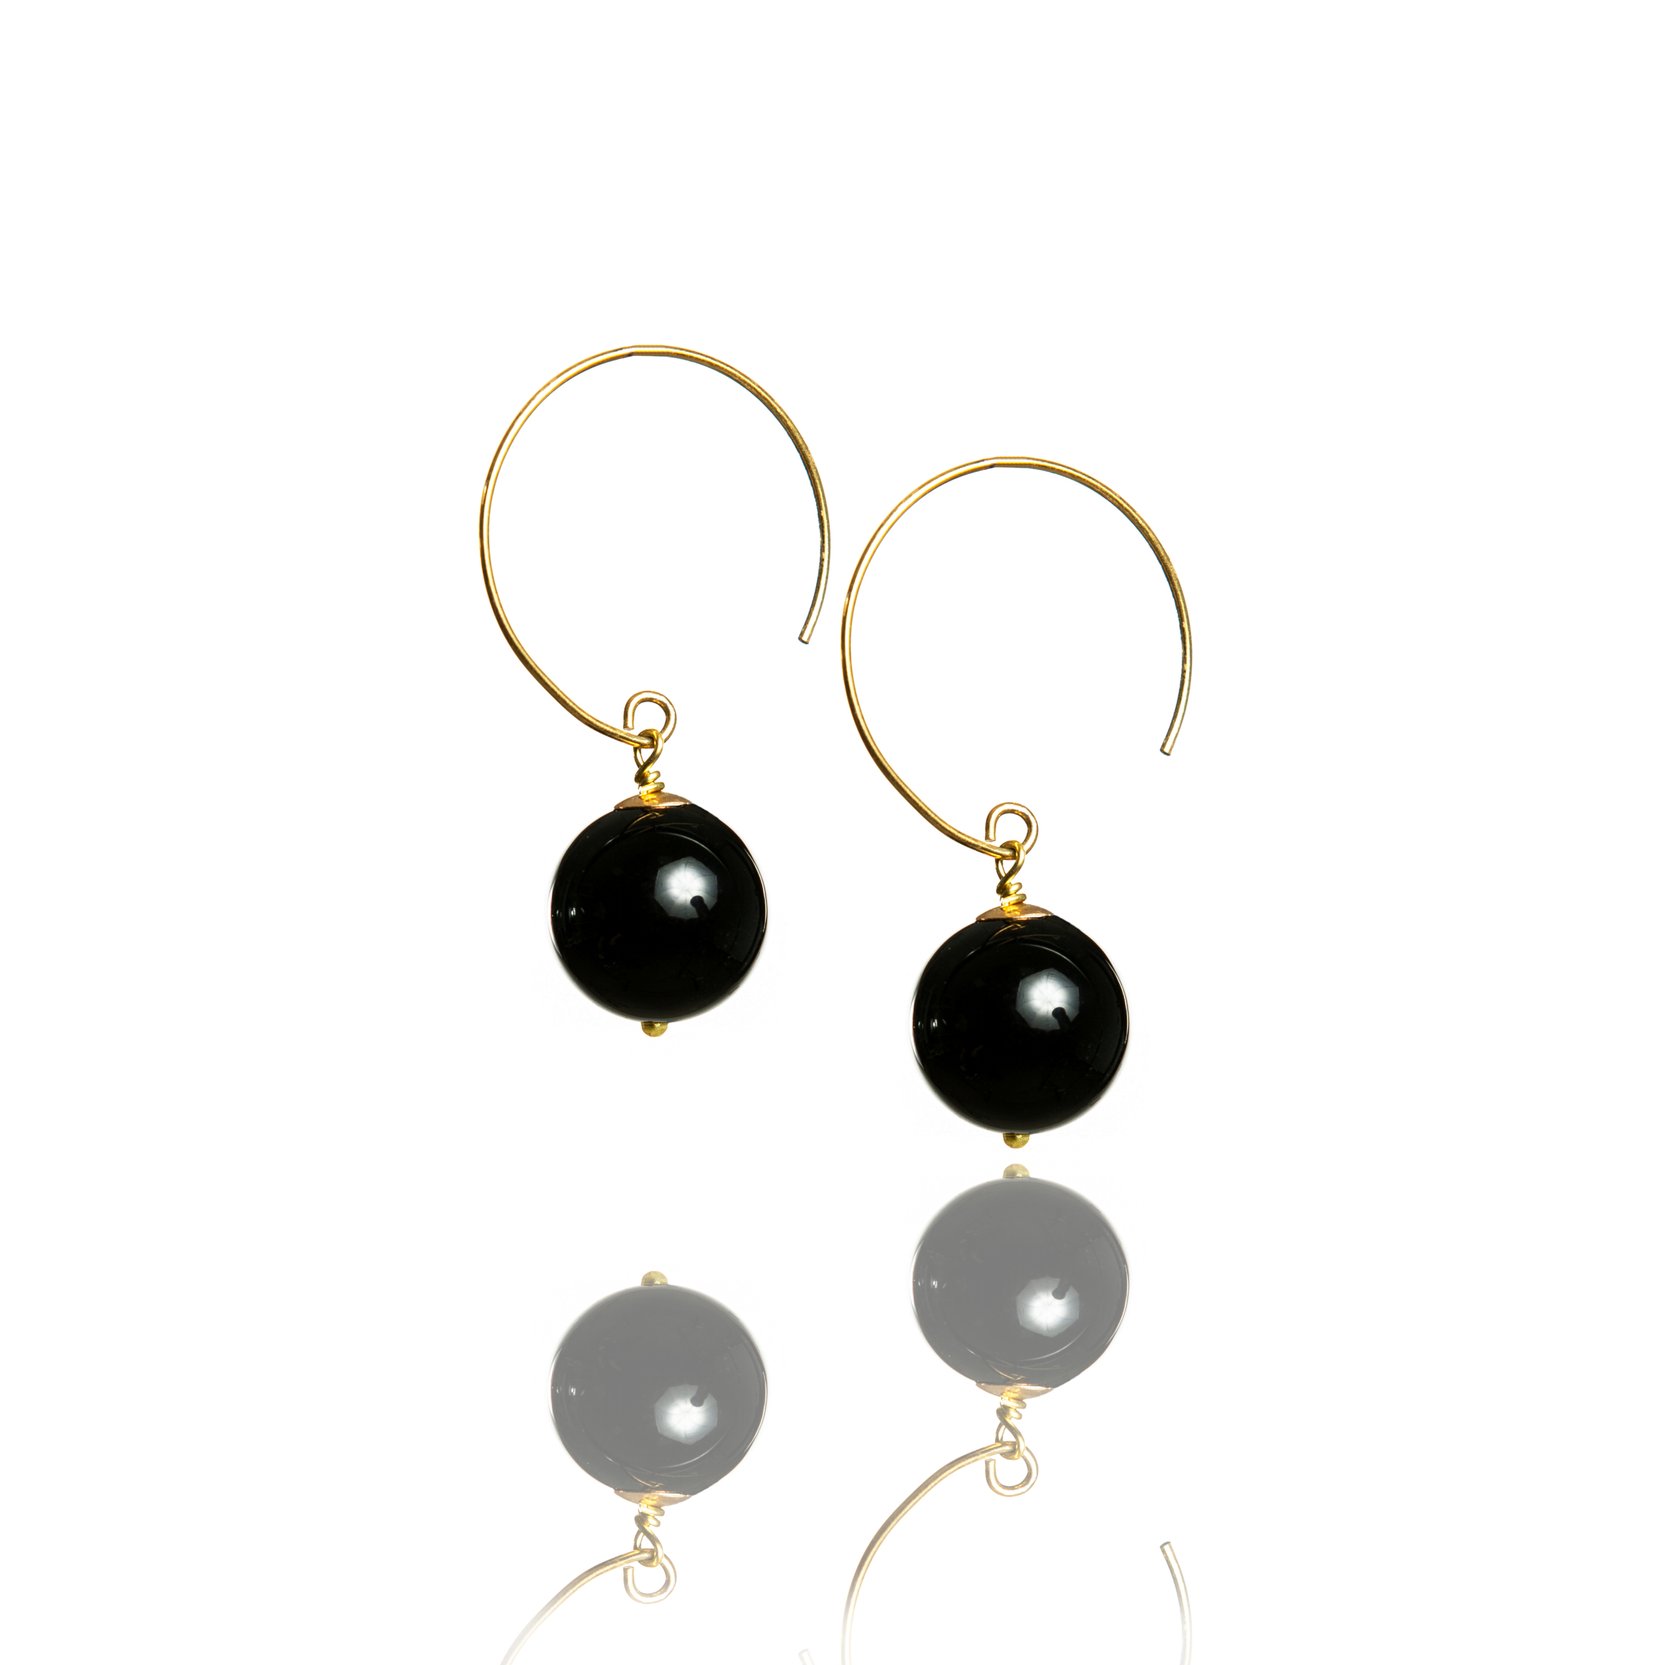 Gold plated earrings with black agates